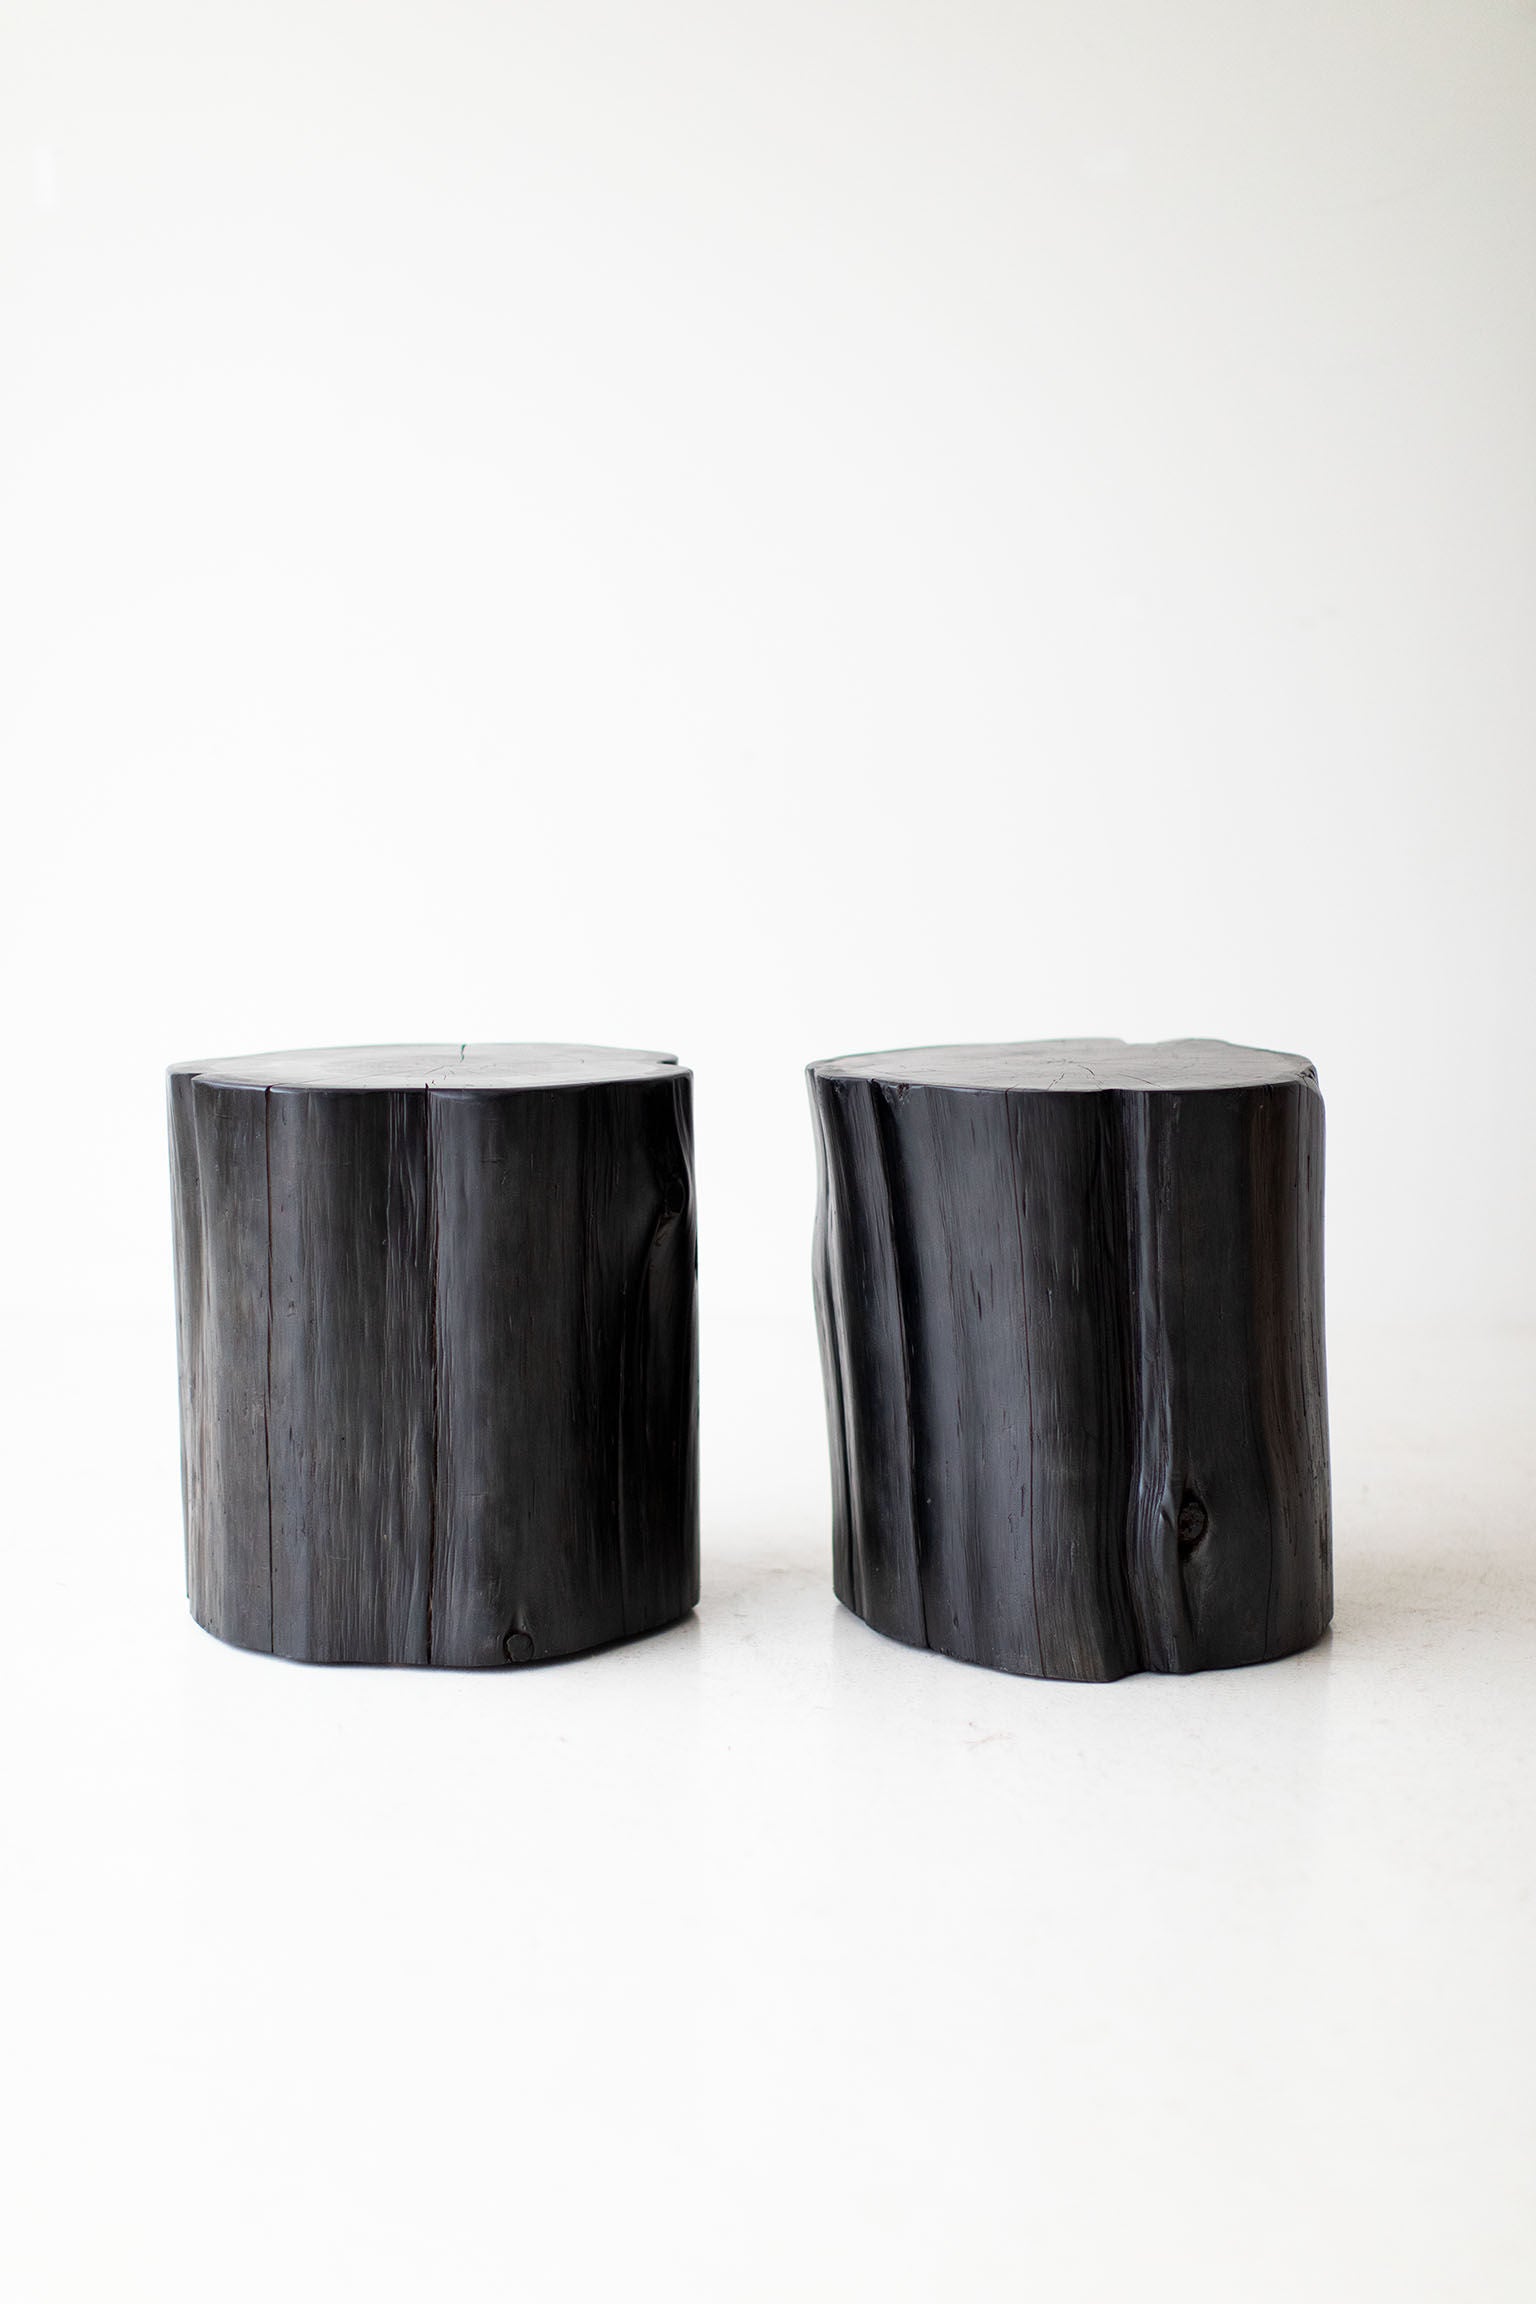 Large-Outdoor-Tree-Stump-Side-Tables-Black-3922-10